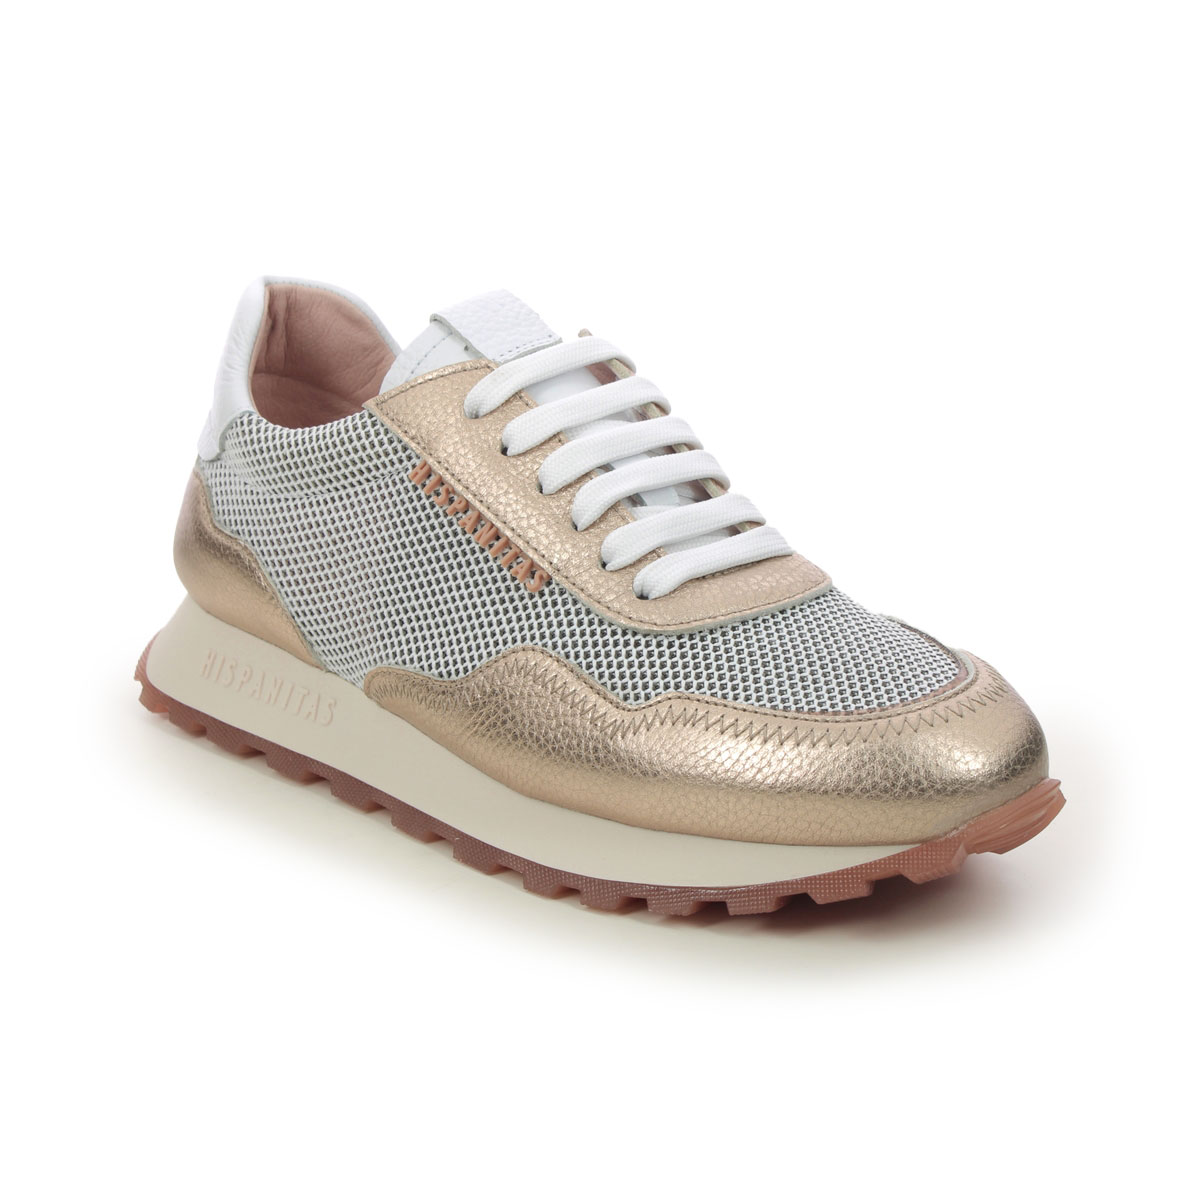 Hispanitas Loira Perf Gold Womens trainers HV243231-006 in a Plain Leather and Textile in Size 40